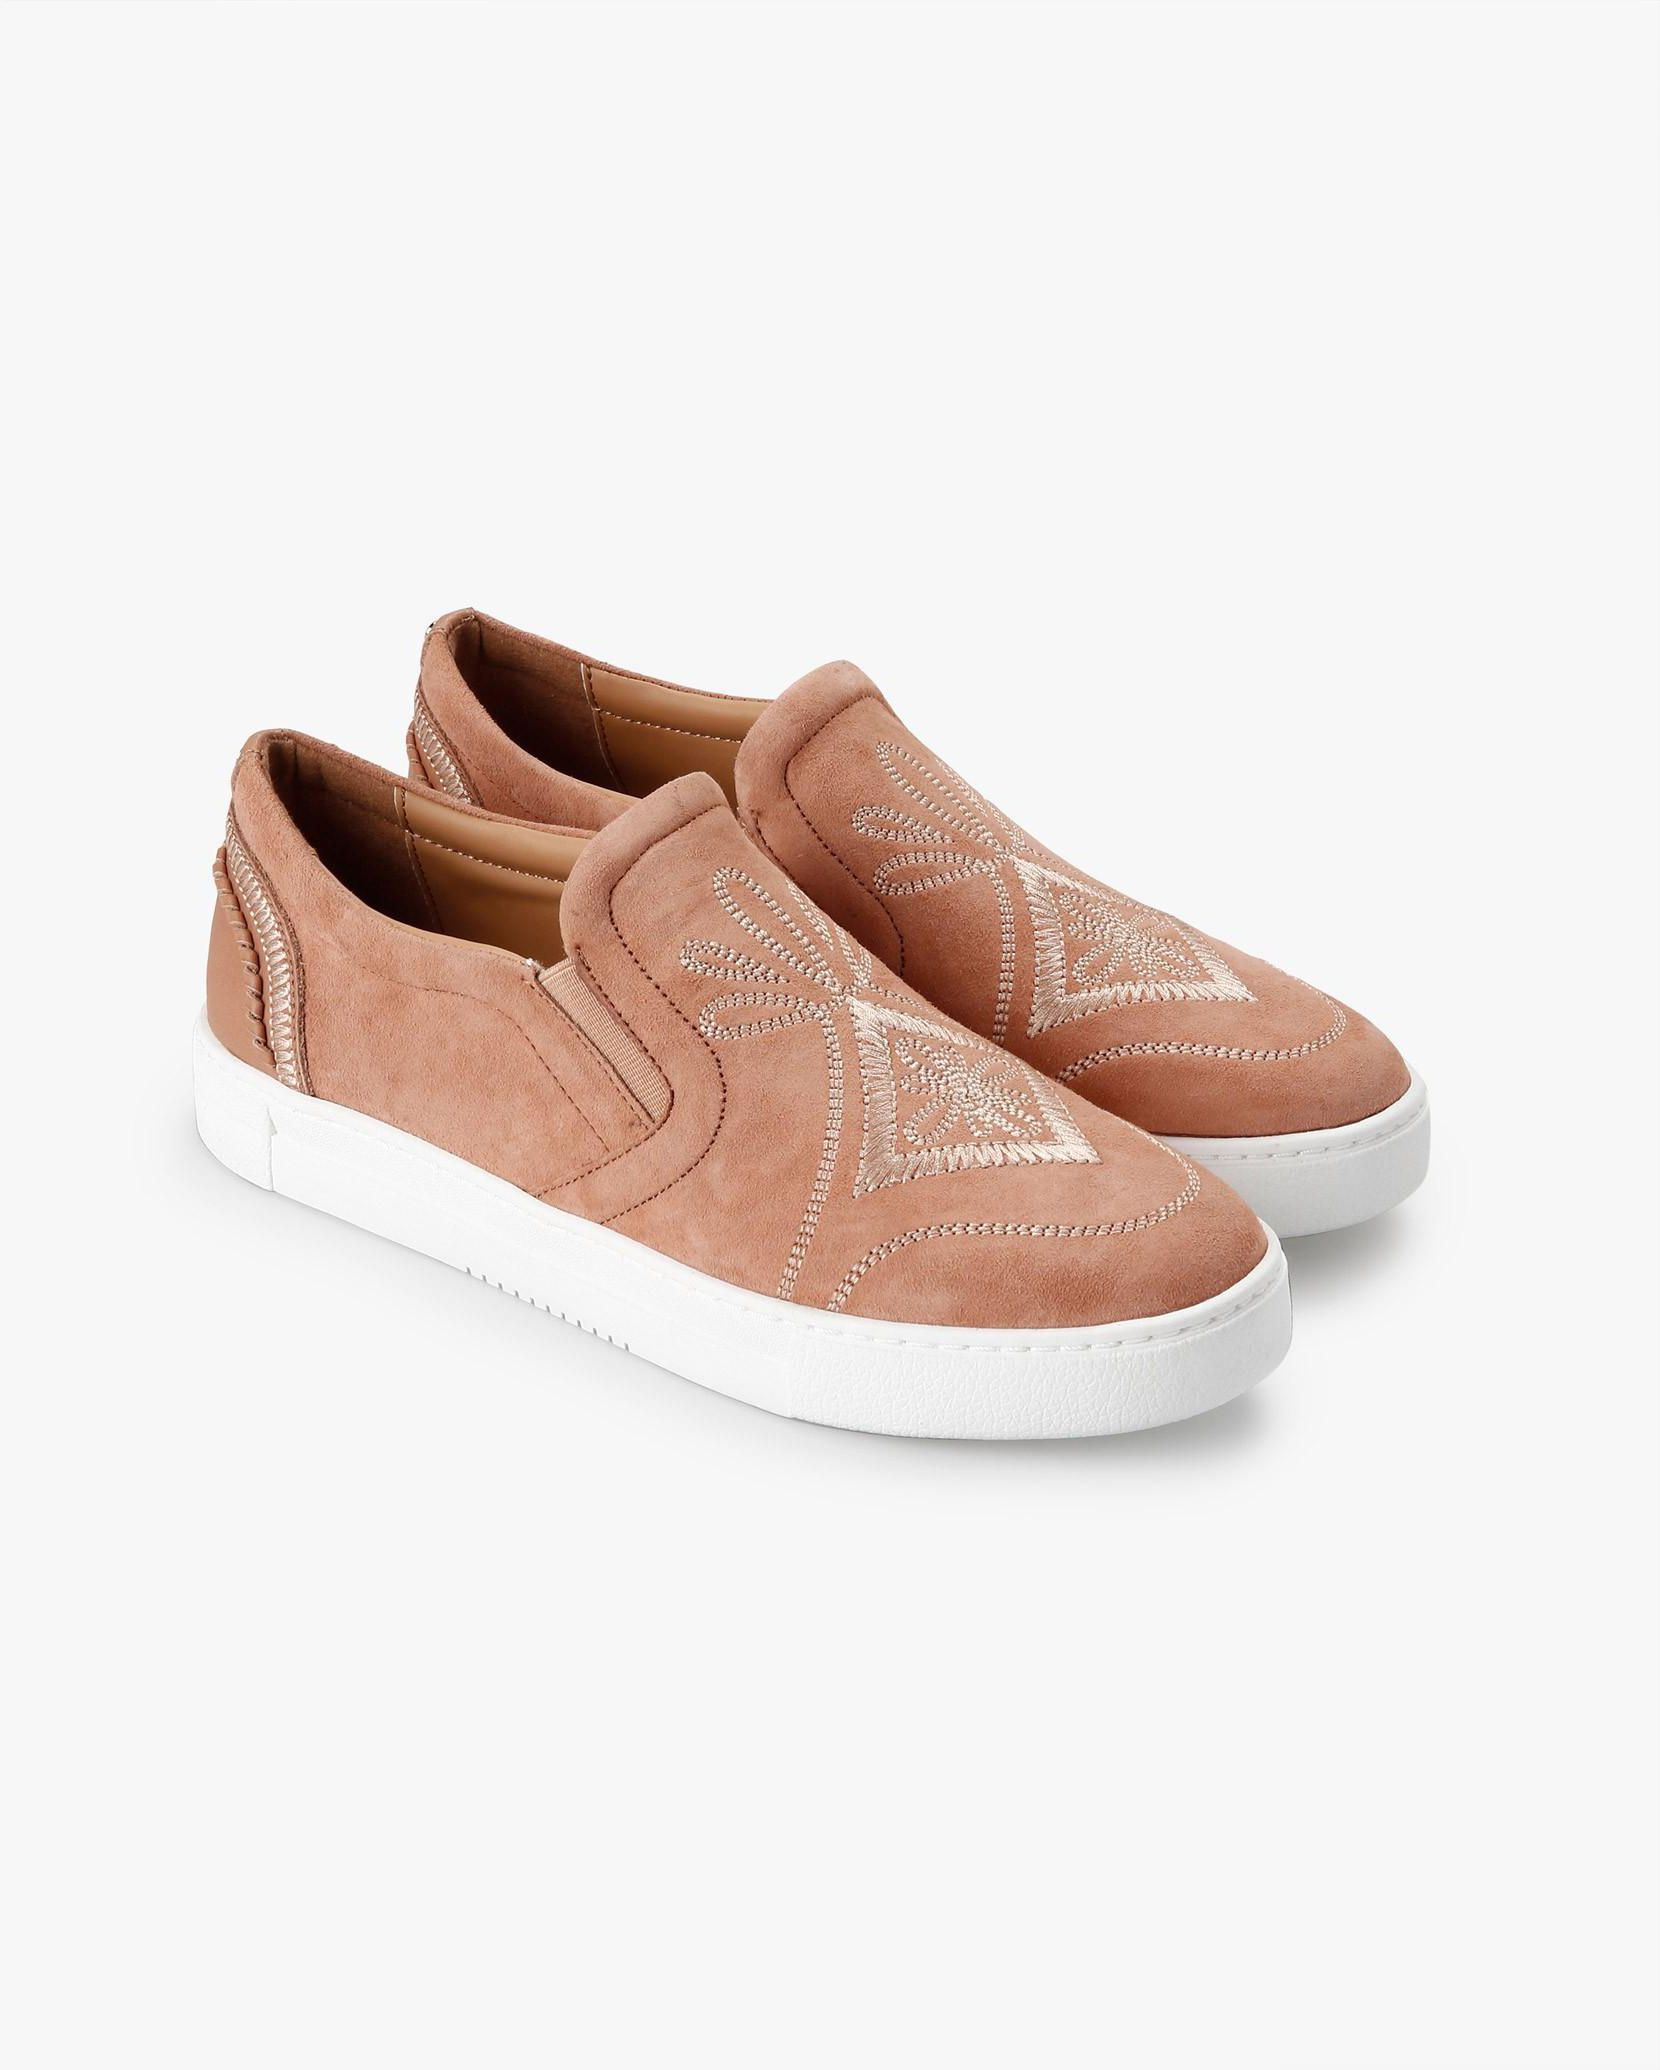 Grilla Slip-On Shoes